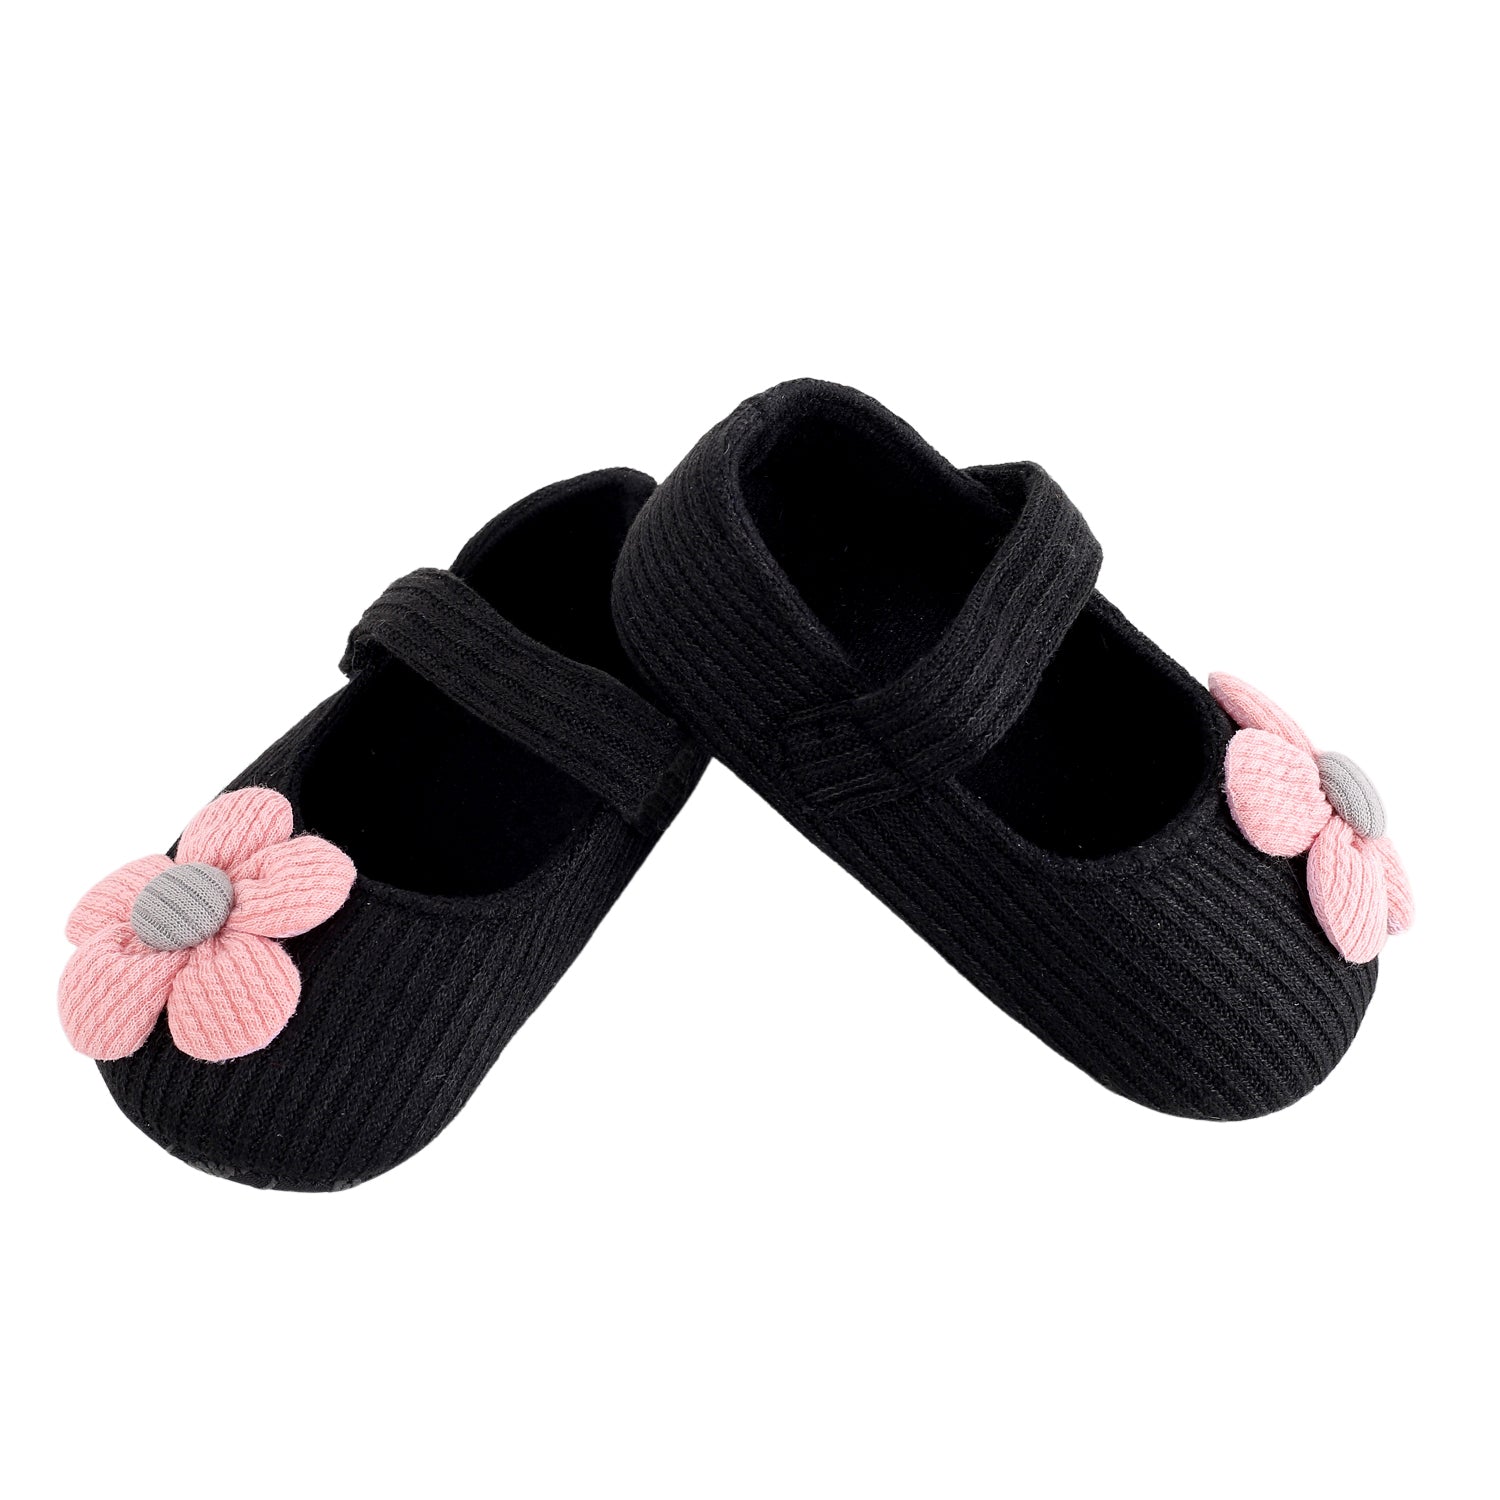 Baby Moo Floral Applique Black And Pink Booties